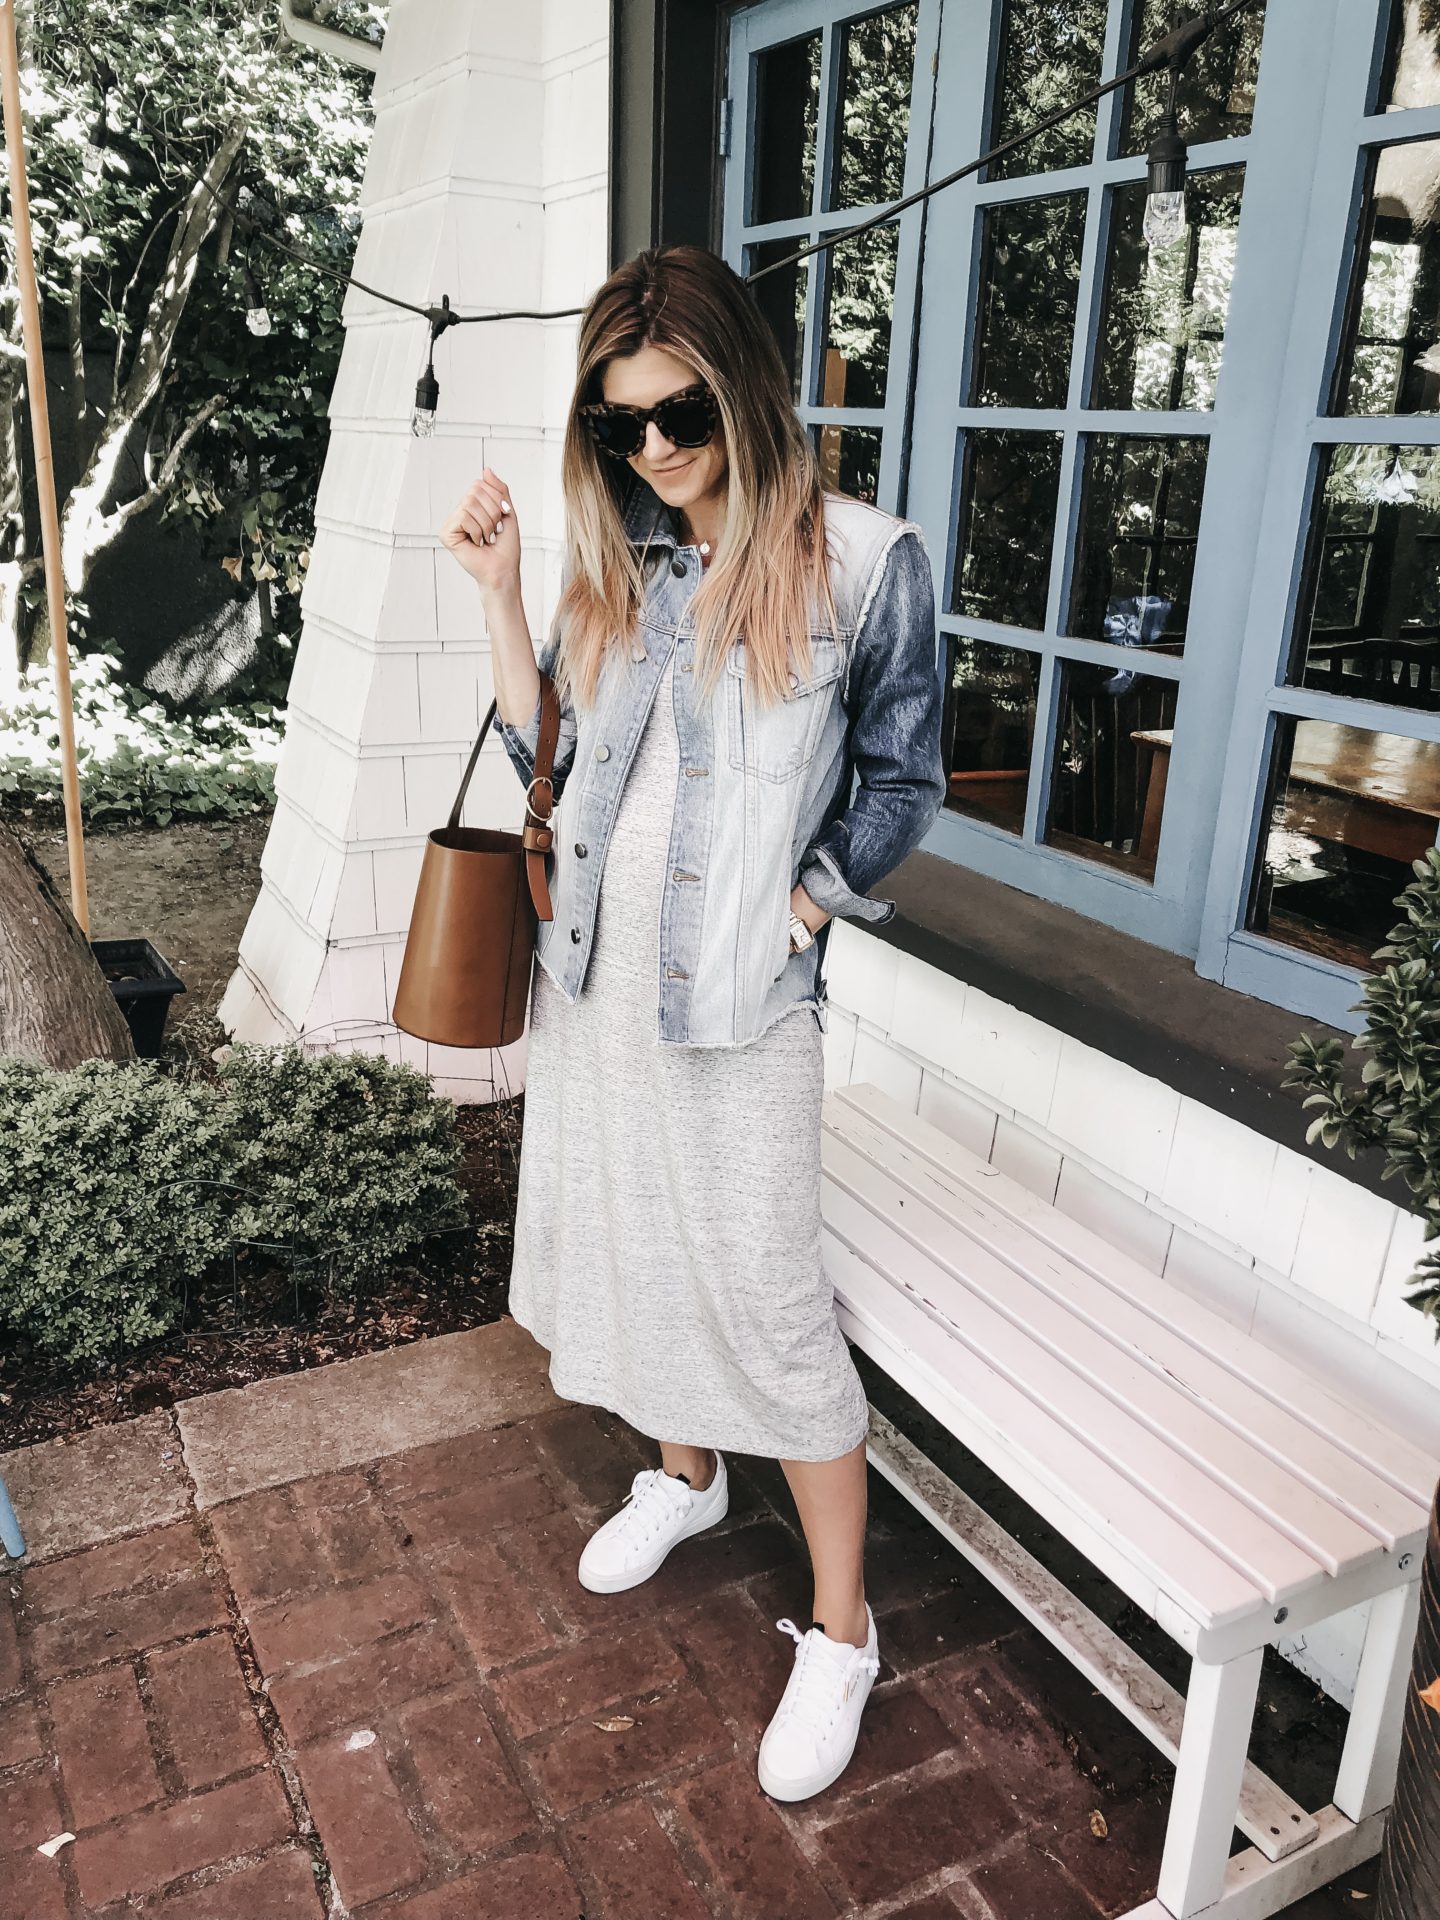 The Grey Edit - Style Blogger - Uniqlo T-shirt Dress - Denim Jacket - White Sneakers - Leather Bucket Bag - Daily Look - OOTD